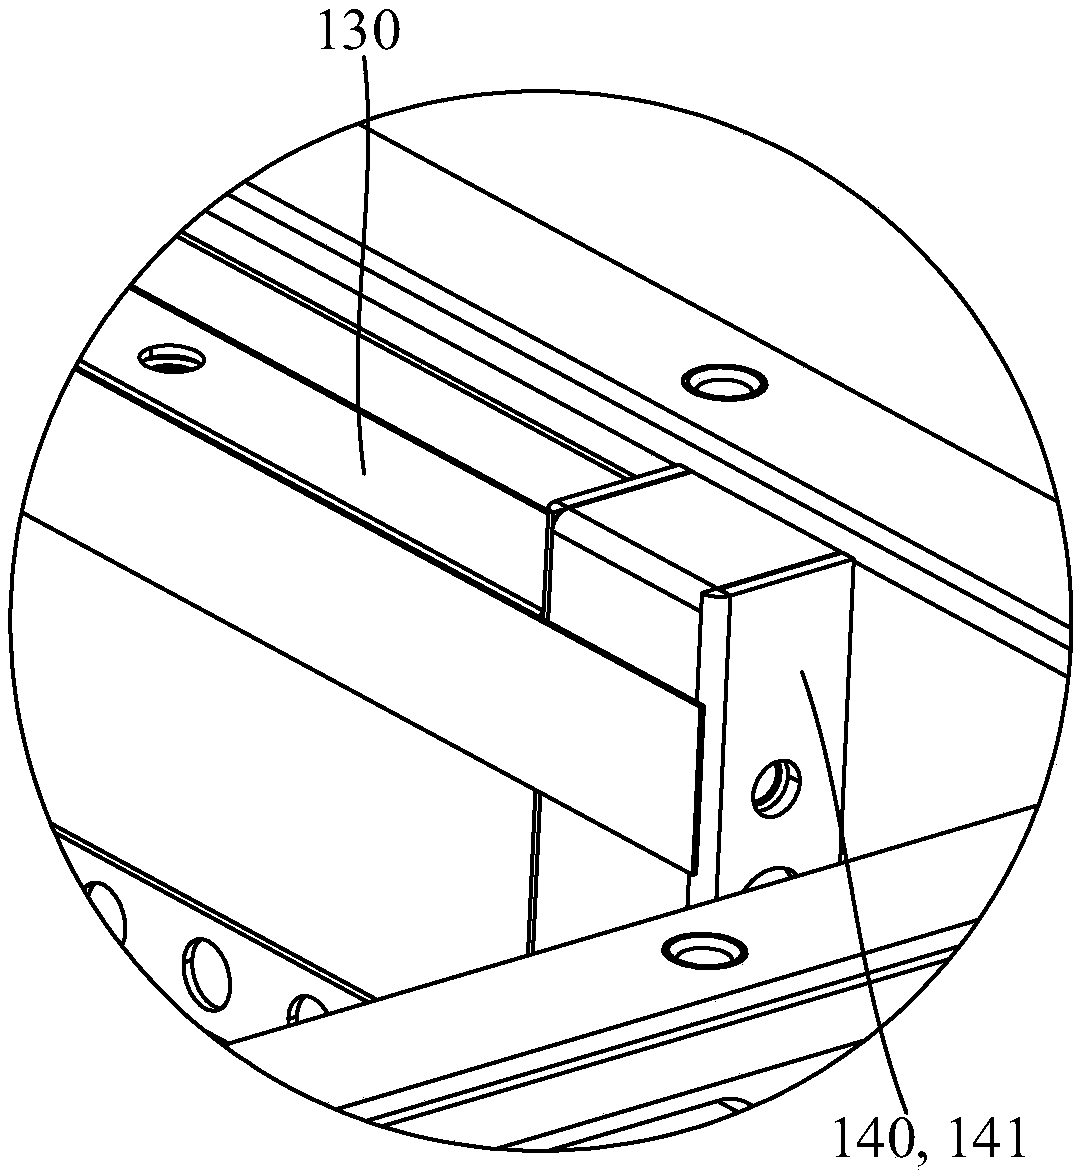 Power battery box having end plate-free battery modules